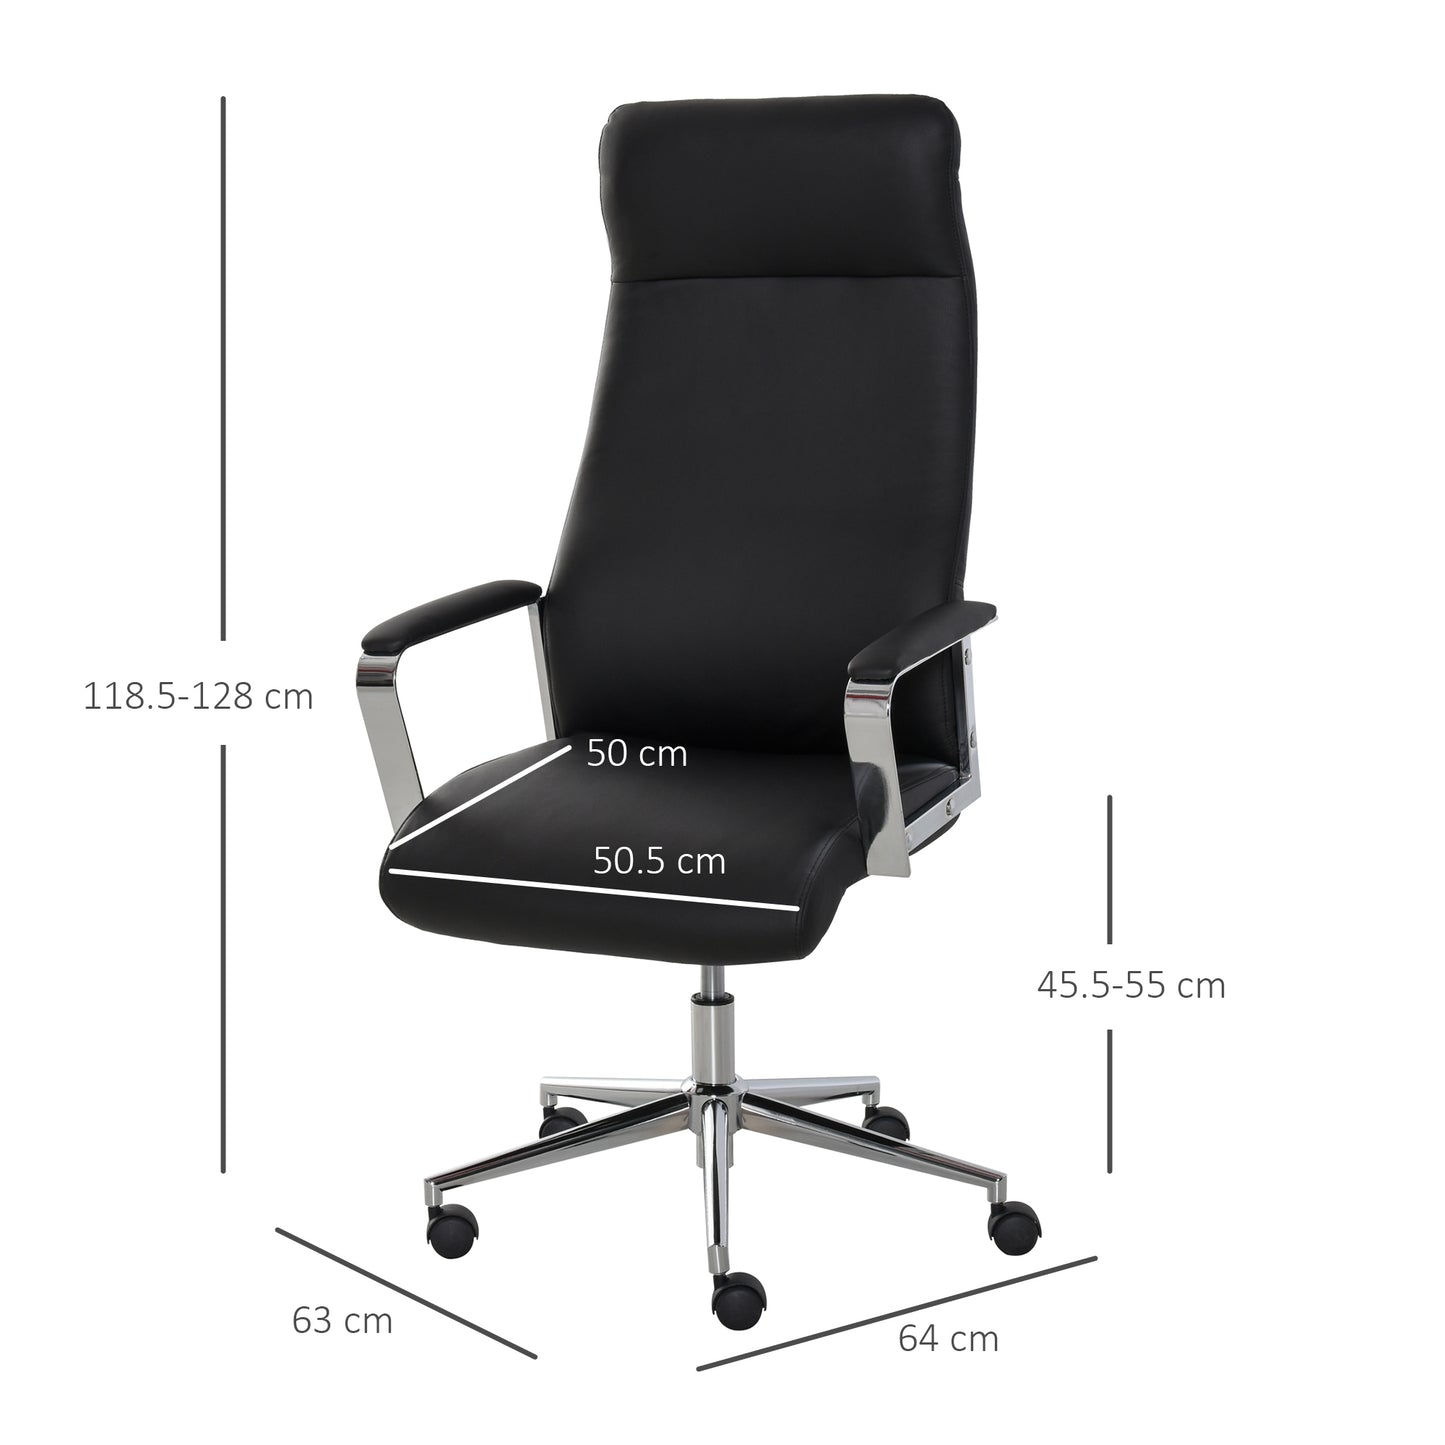 Vinsetto Office Chair Faux Leather High-Back Swivel Computer Desk Chair w/ Wheels, Black